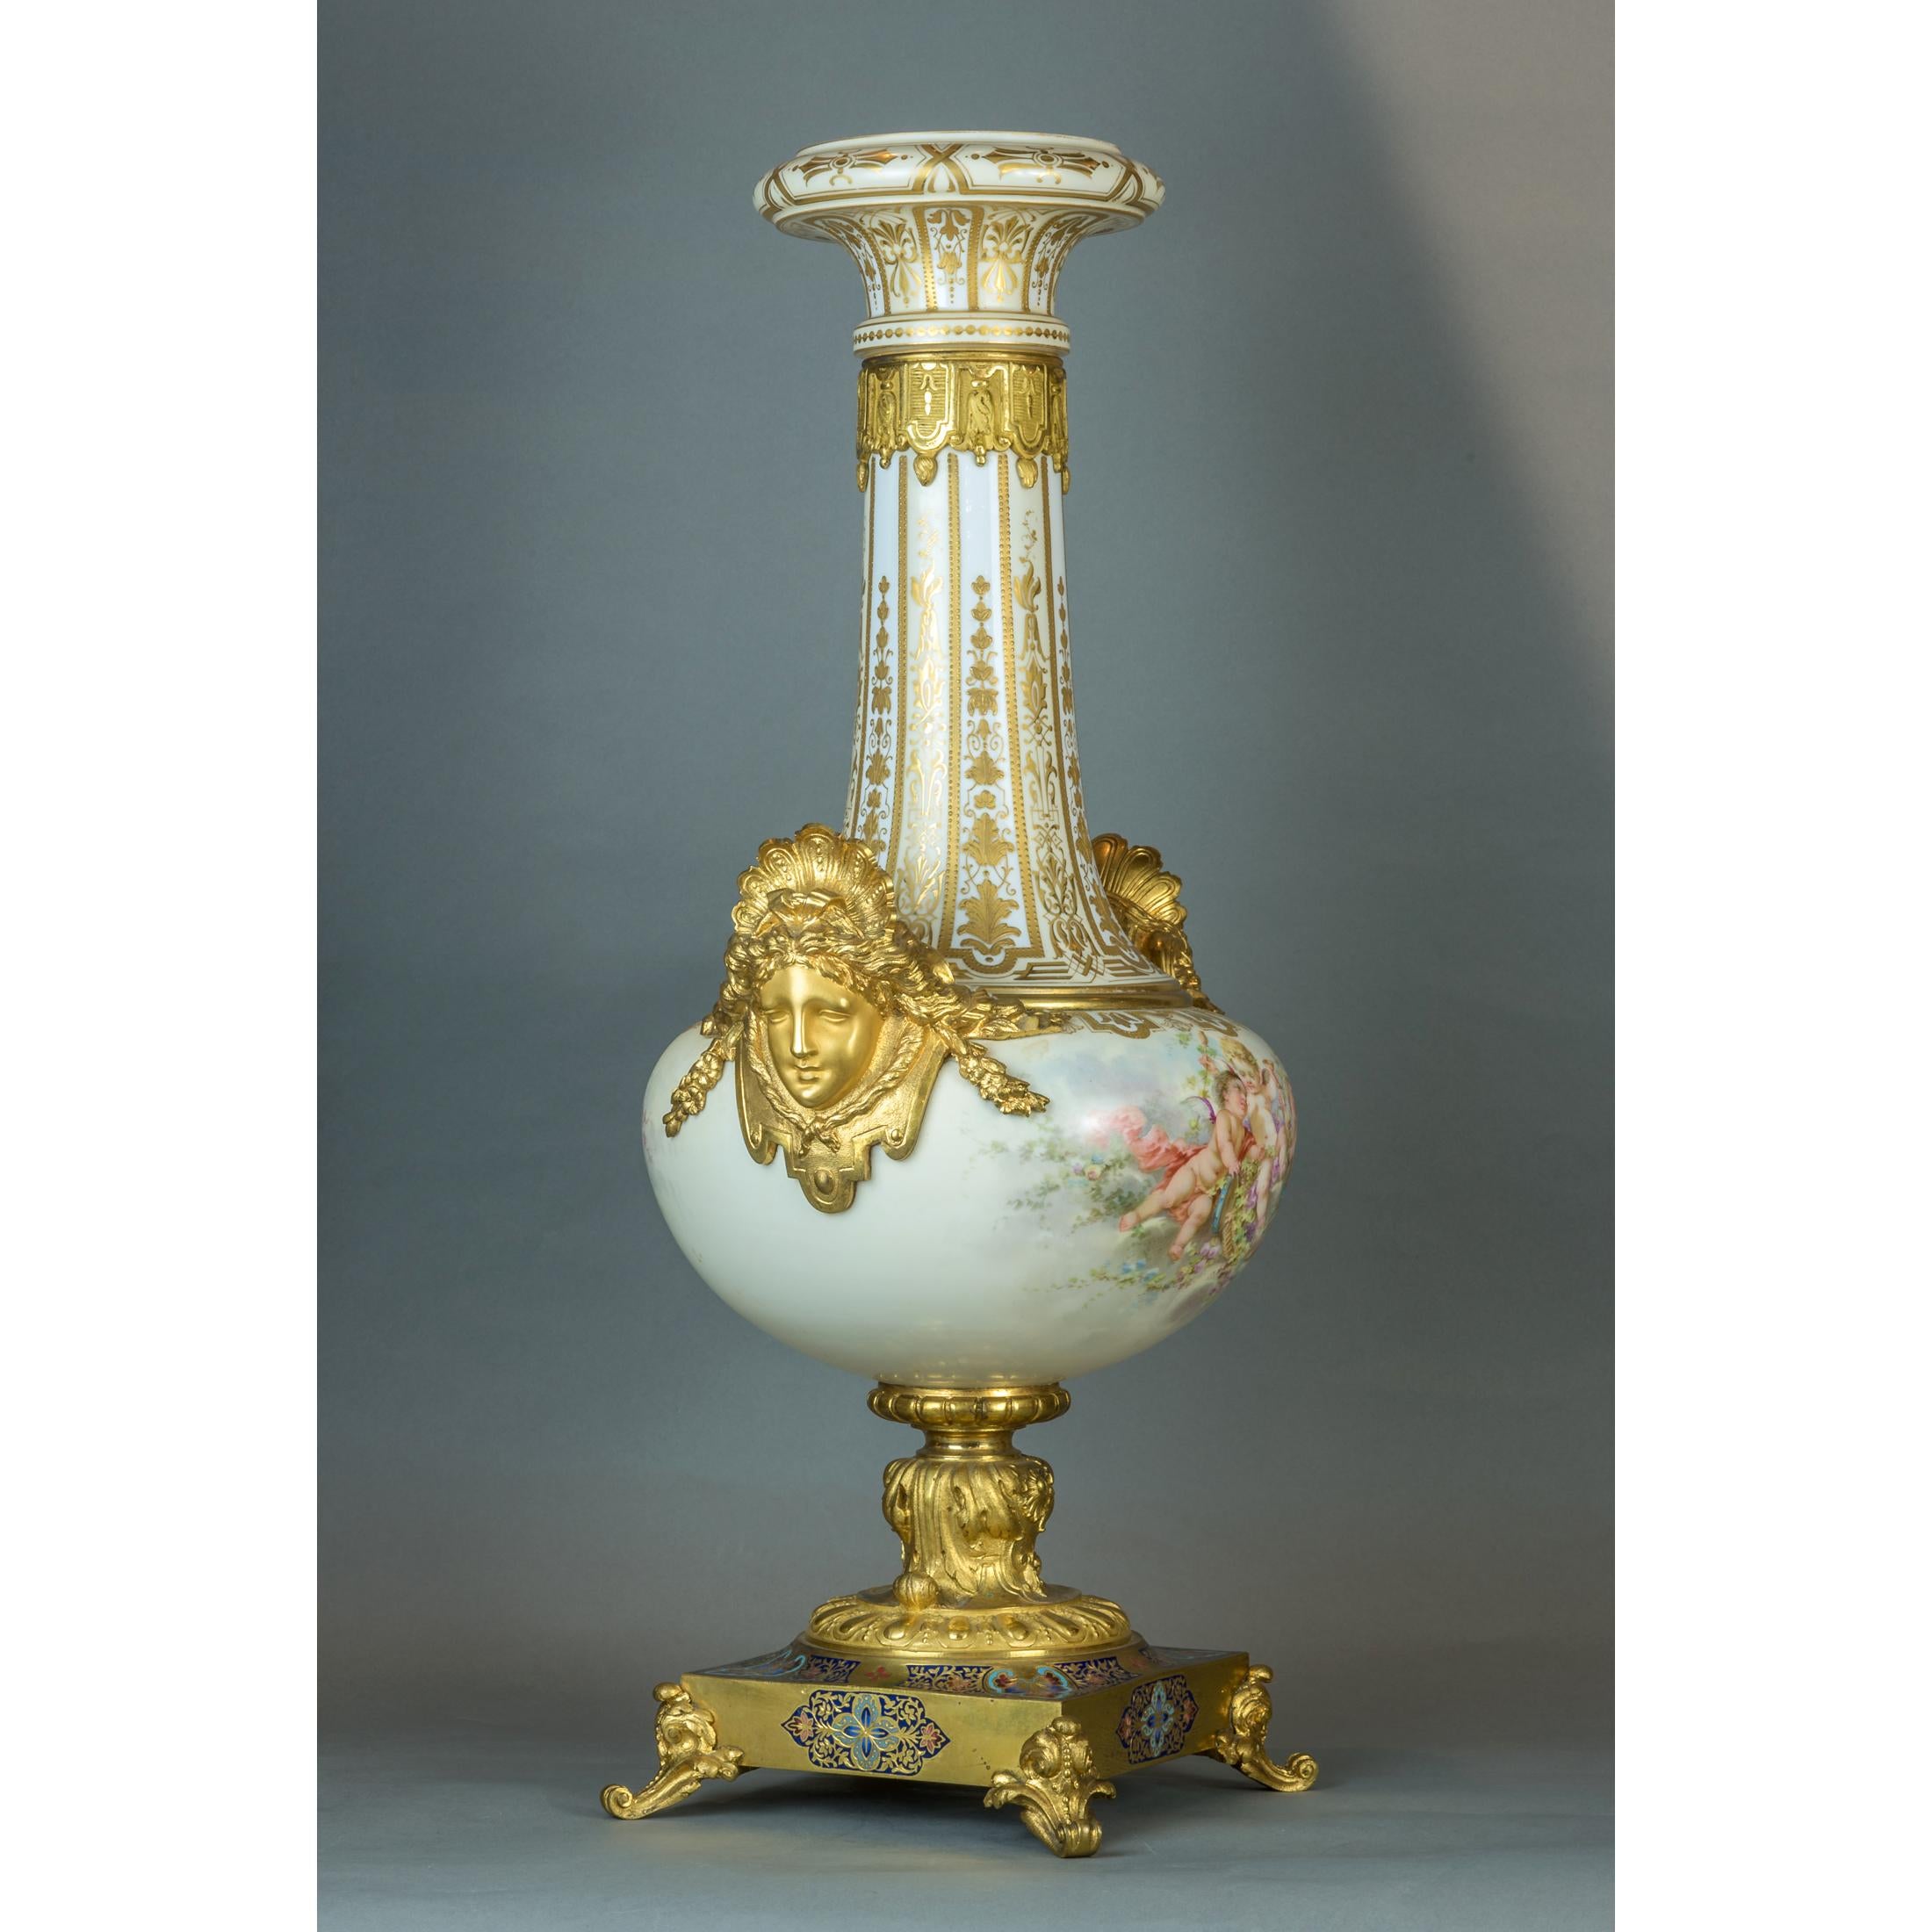 19th Century Pair of Ormolu-Mounted Sèvres-style Porcelain Champlevé Vases For Sale